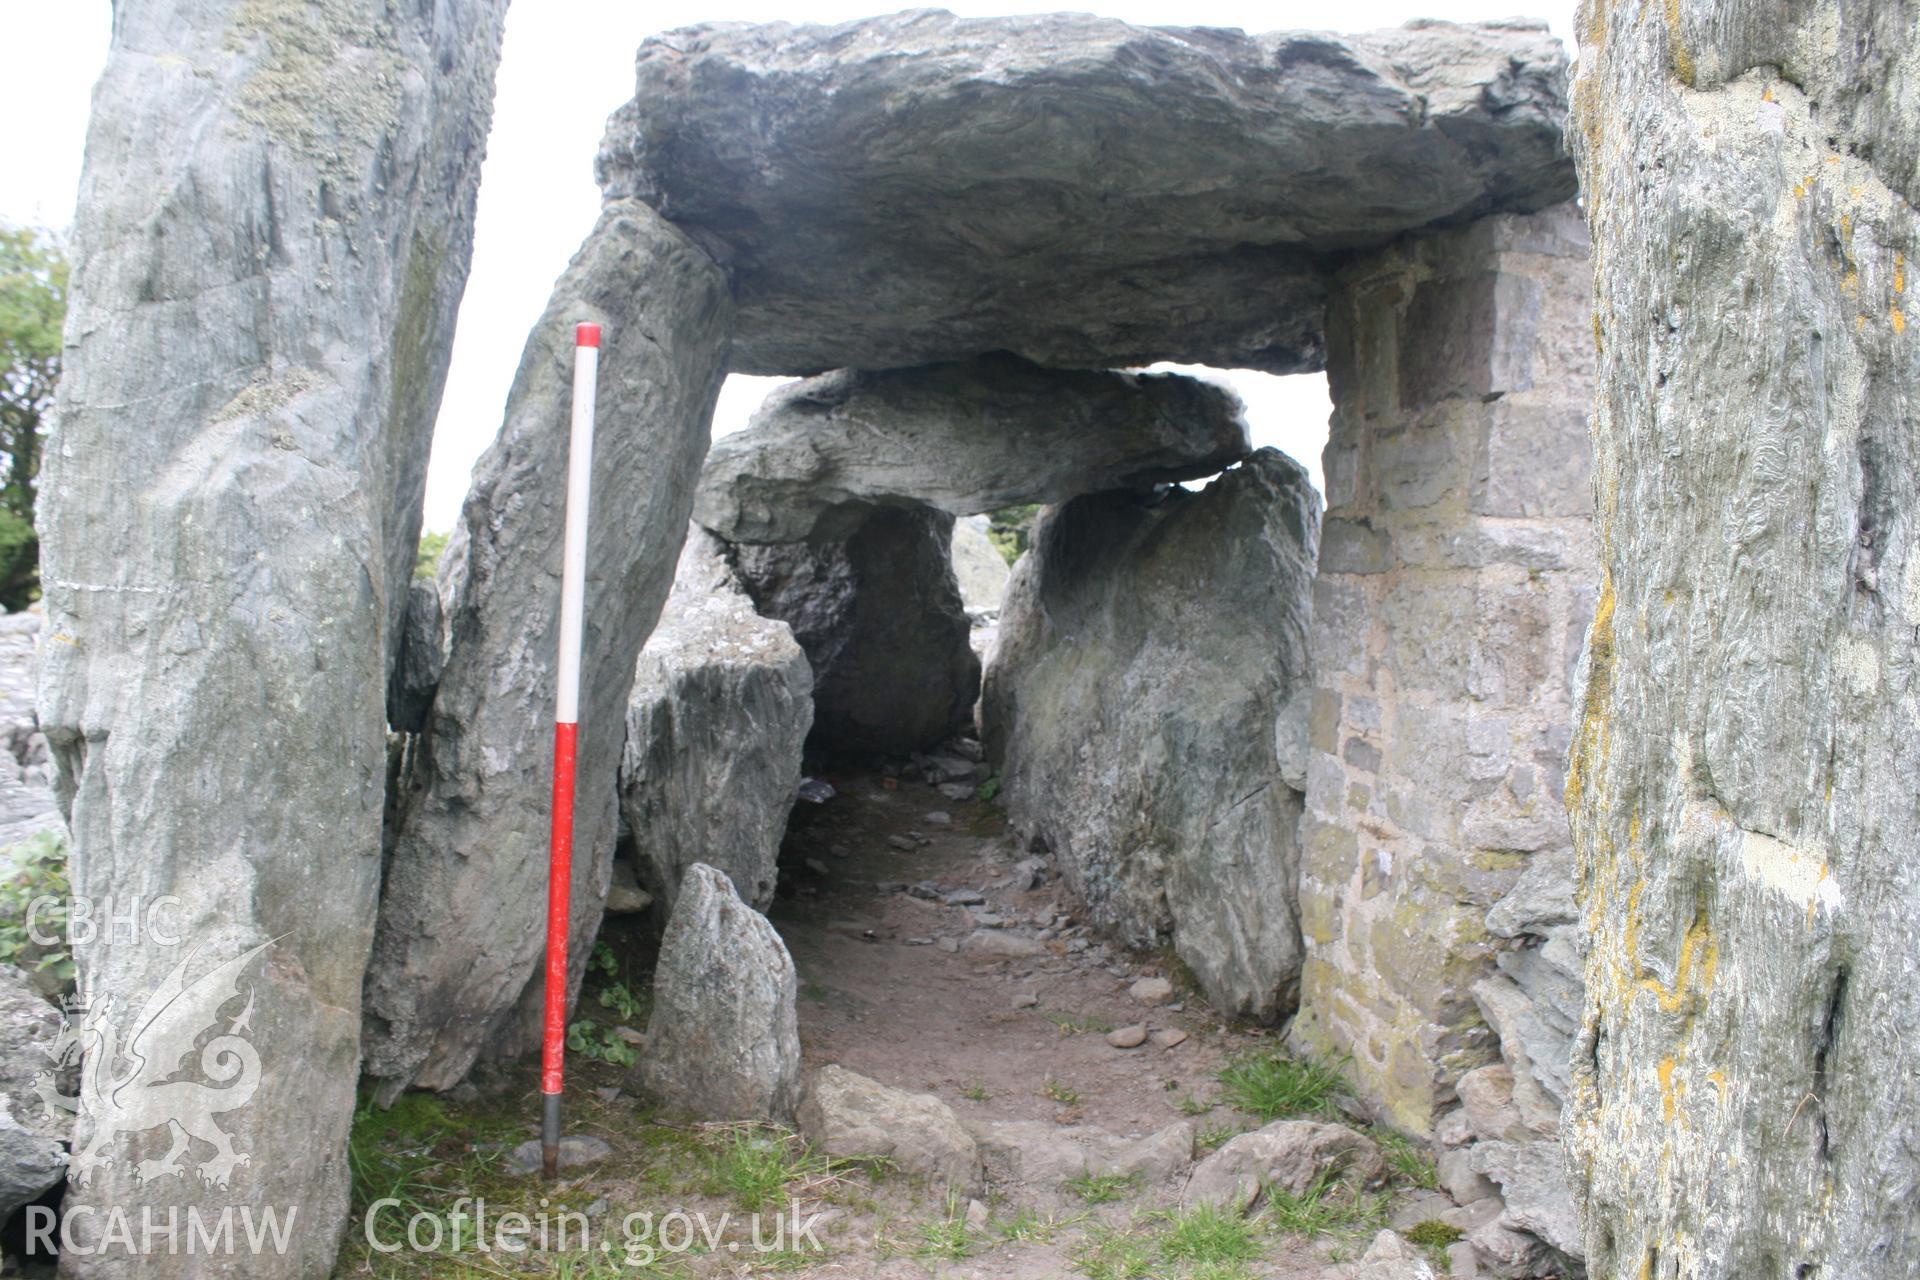 Detail of Trefignath third burial chamber. Looking west. Digital photograph taken as part of archaeological work at Parc Cybi Enterprise Zone, Holyhead, Anglesey, carried out by Archaeology Wales, 2017. Project number: P2522.